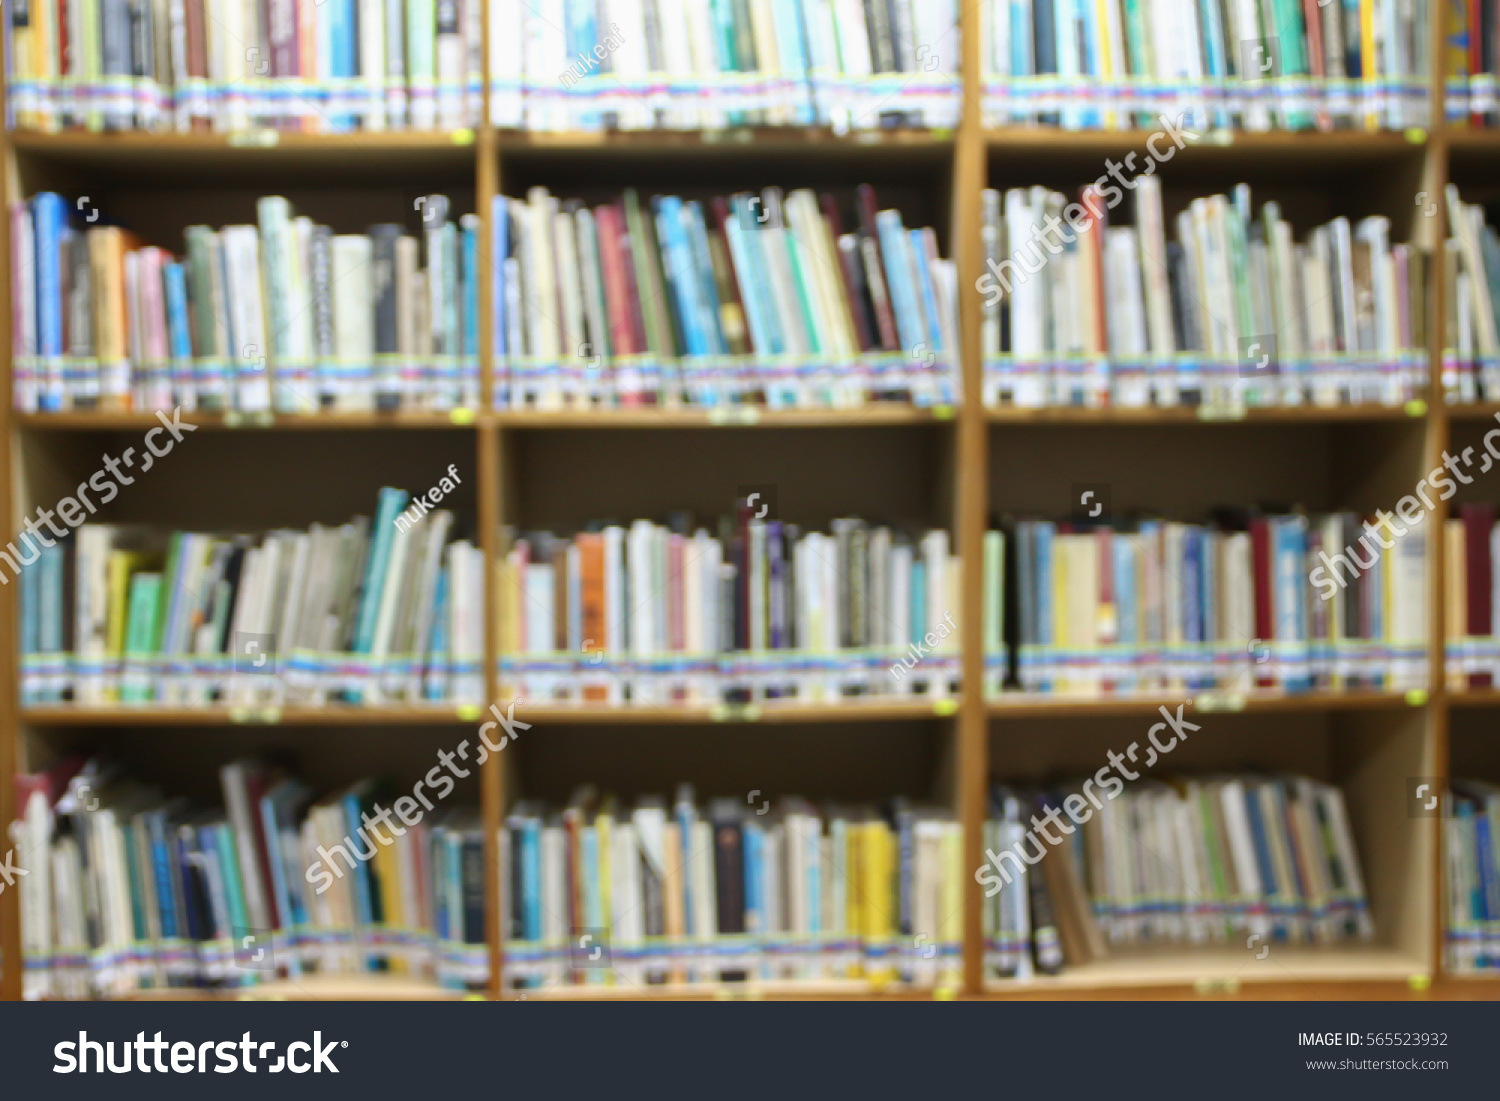 Blurred Background Library Interior Stock Photo 565523932